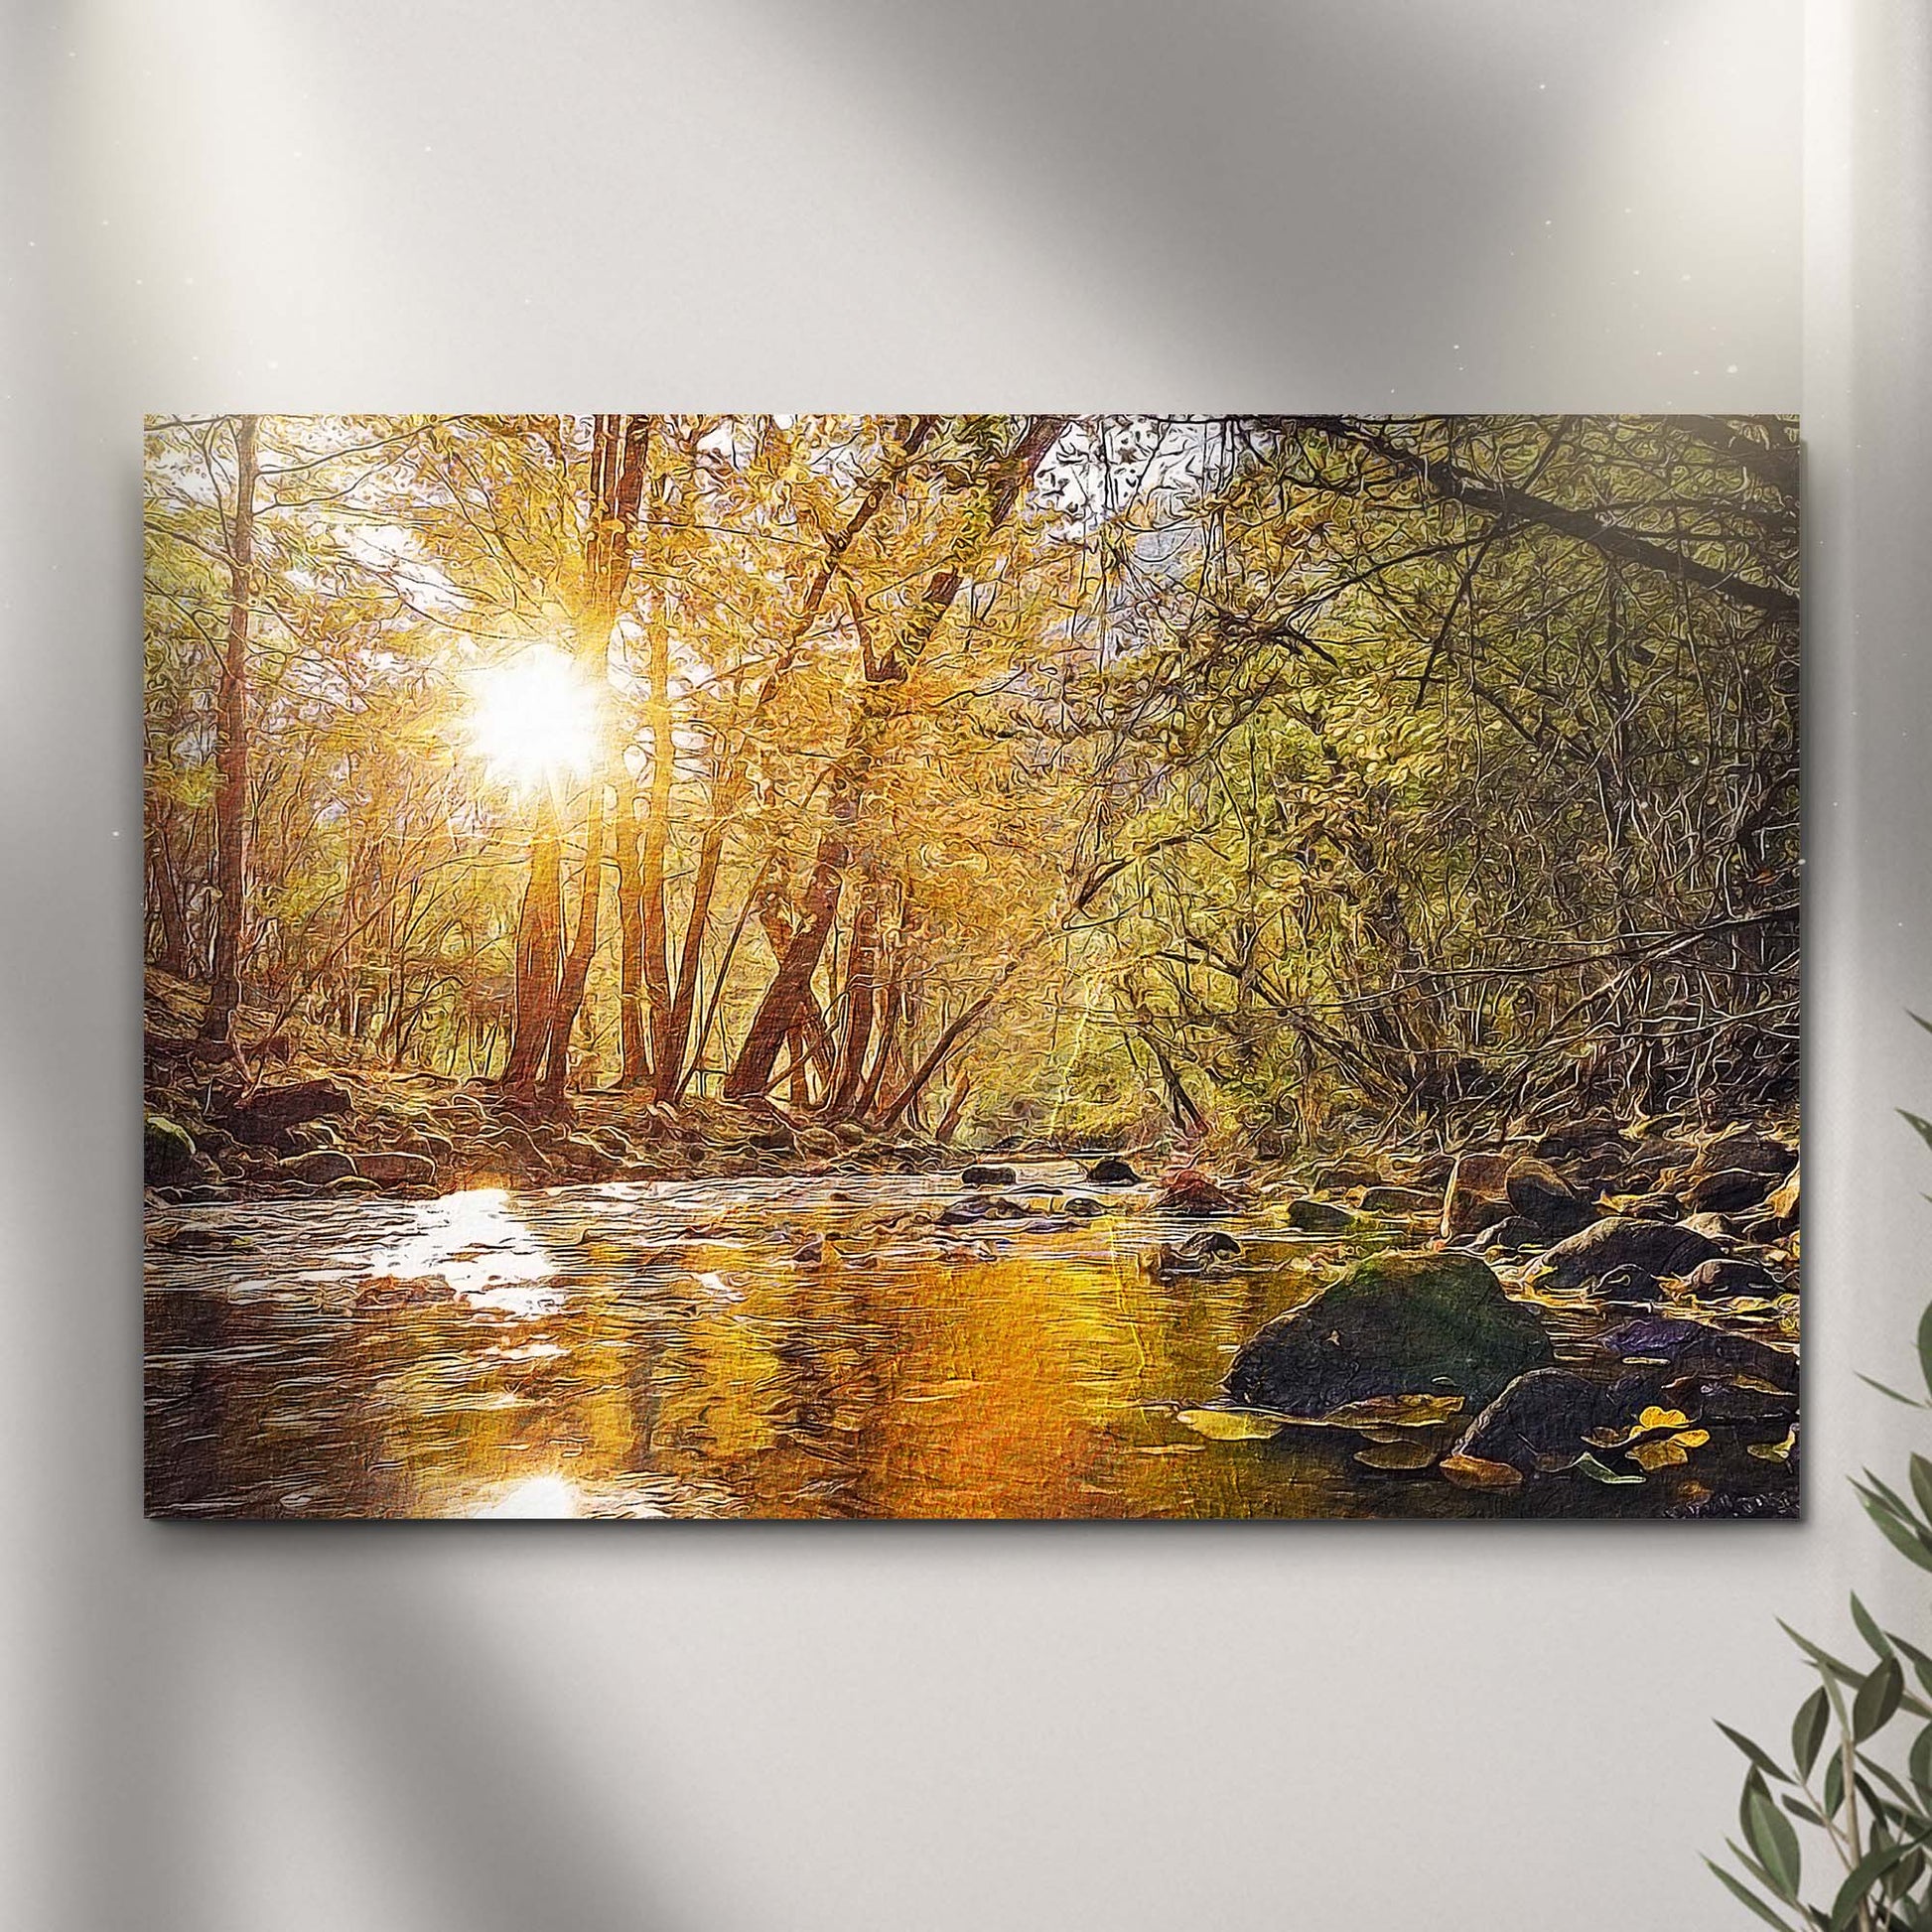 Sunlit River Woods Wall Art - Image by Tailored Canvases